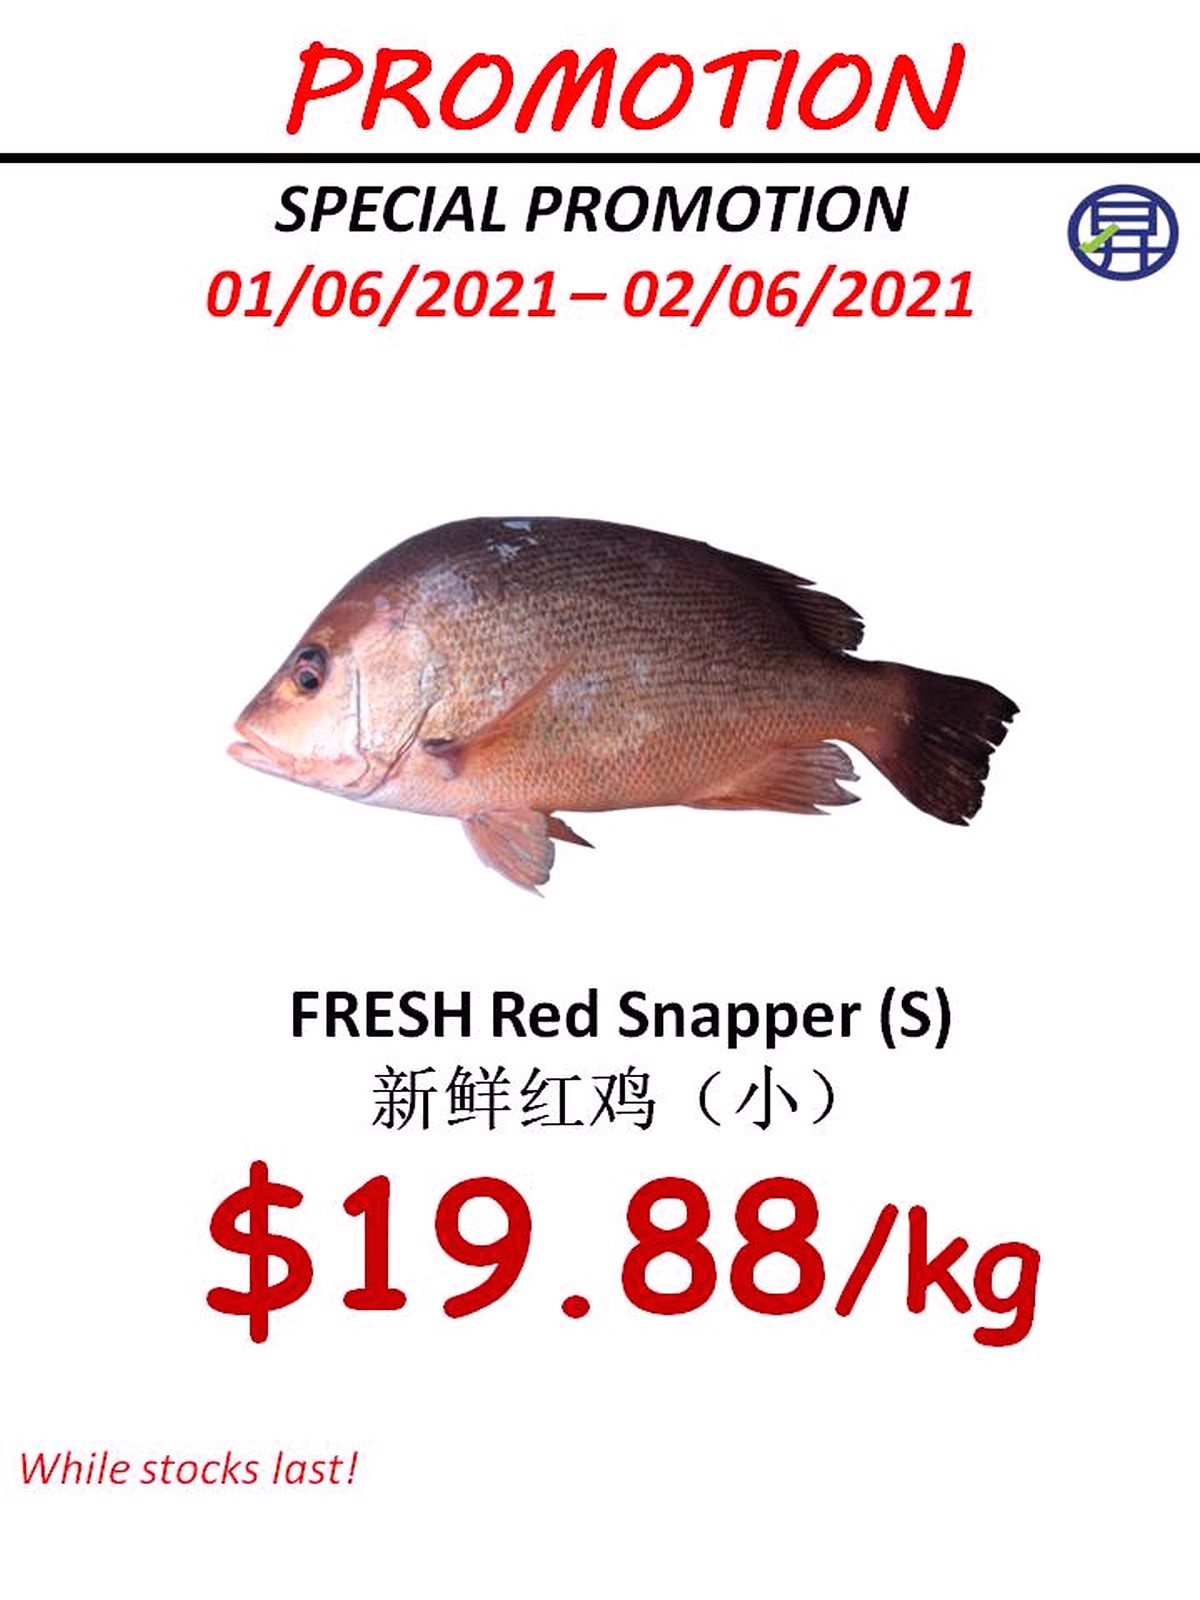 Sheng-Siong-Today-Fresh-Fish-Seafood-Promotion-2021-Singapore-00d Now till 17 Jun  2021: Sheng Siong Mega Promotion! 2 Fresh Seabass for $9.88 only